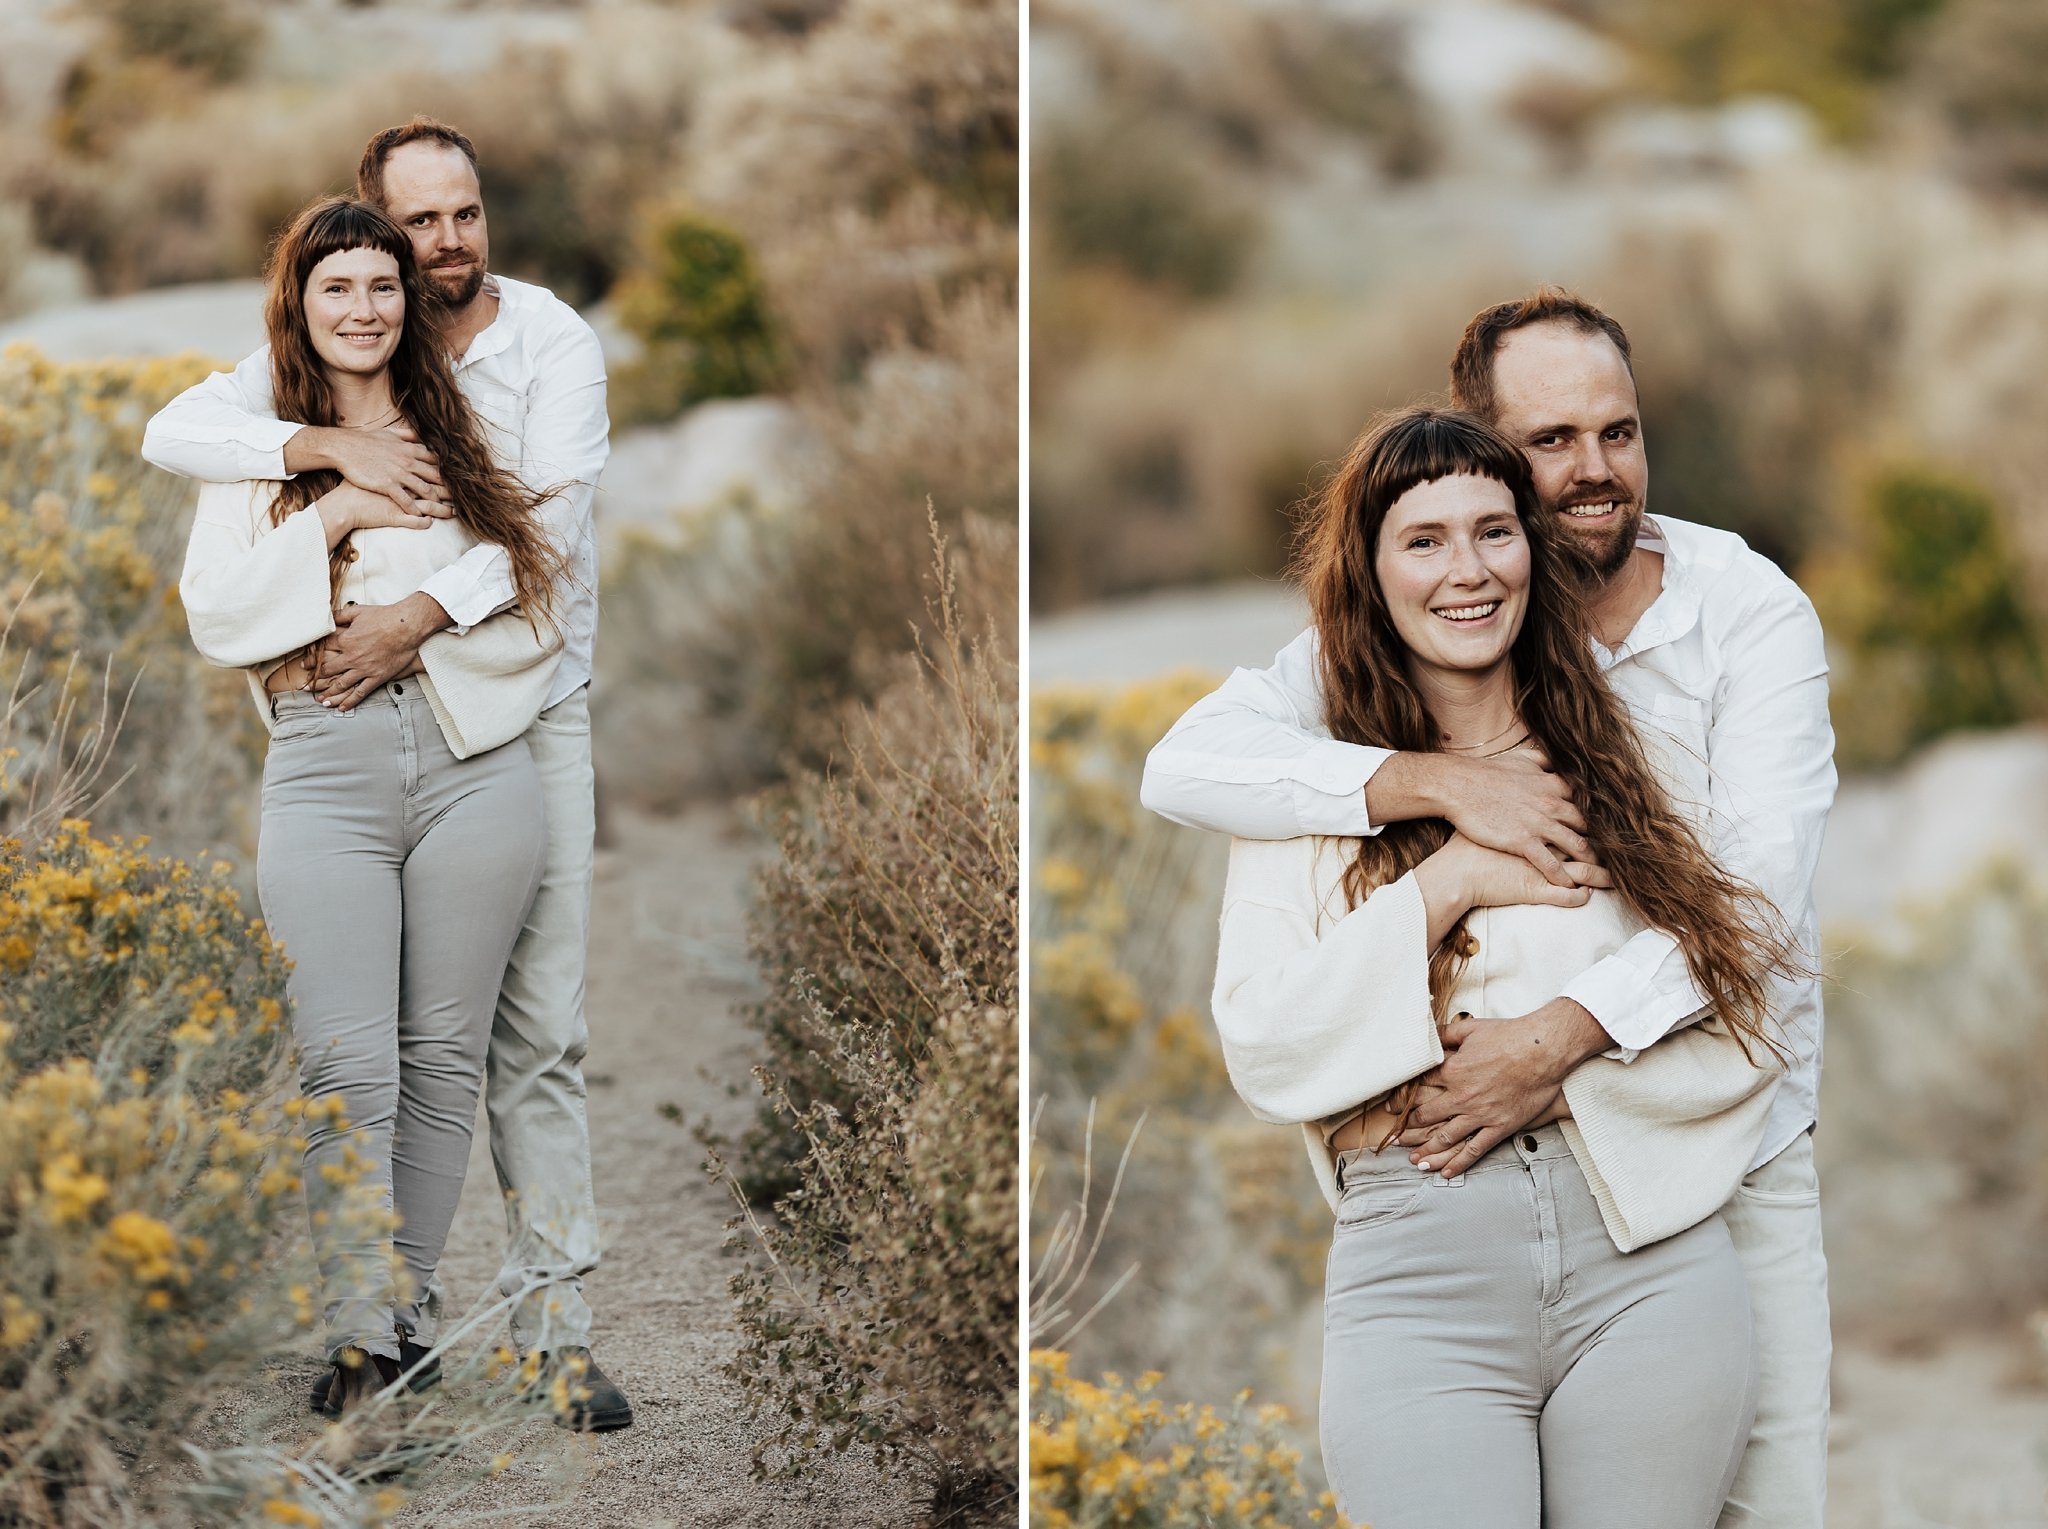 Alicia+lucia+photography+-+albuquerque+wedding+photographer+-+santa+fe+wedding+photography+-+new+mexico+wedding+photographer+-+new+mexico+wedding+-+desert+engagement+-+foothills+engagement+-+mountain+engagement_0006.jpg